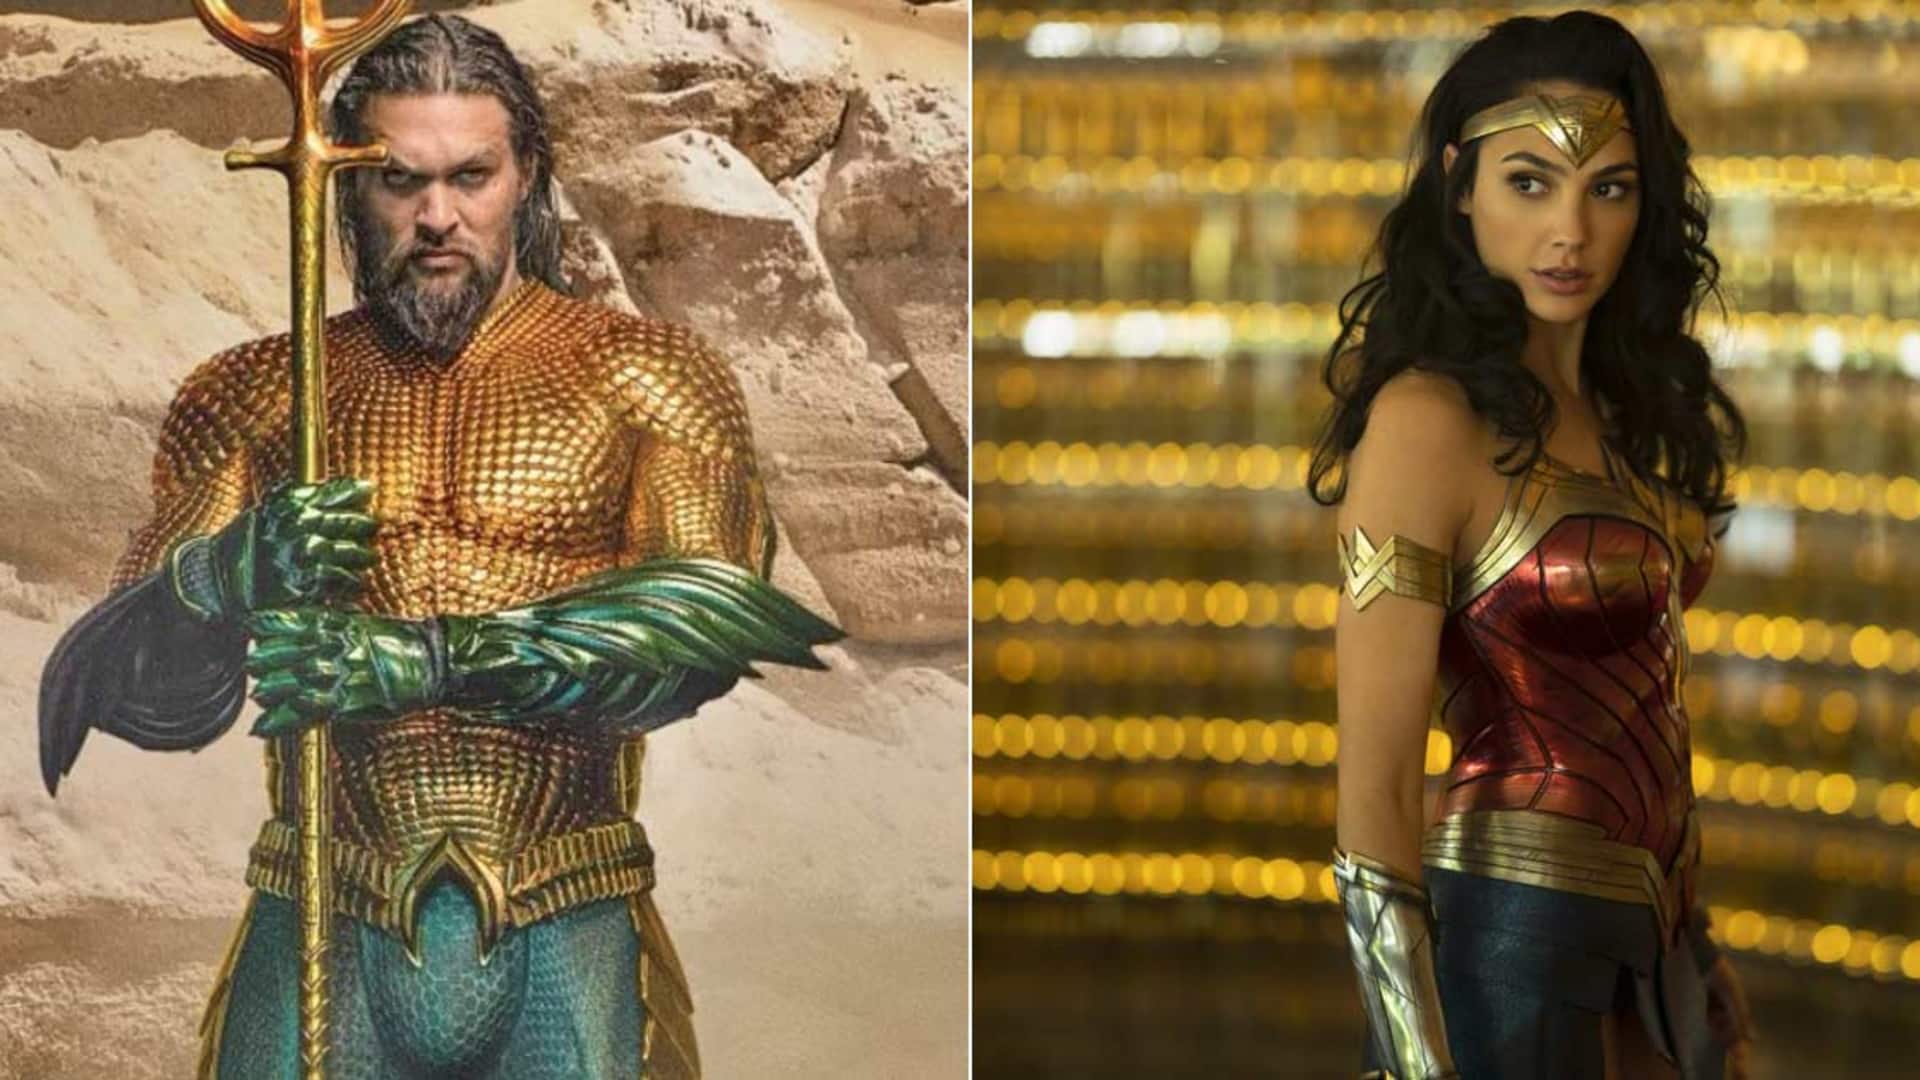 Why top-grossing superheroes, Aquaman, Wonder Woman, left out of DCU